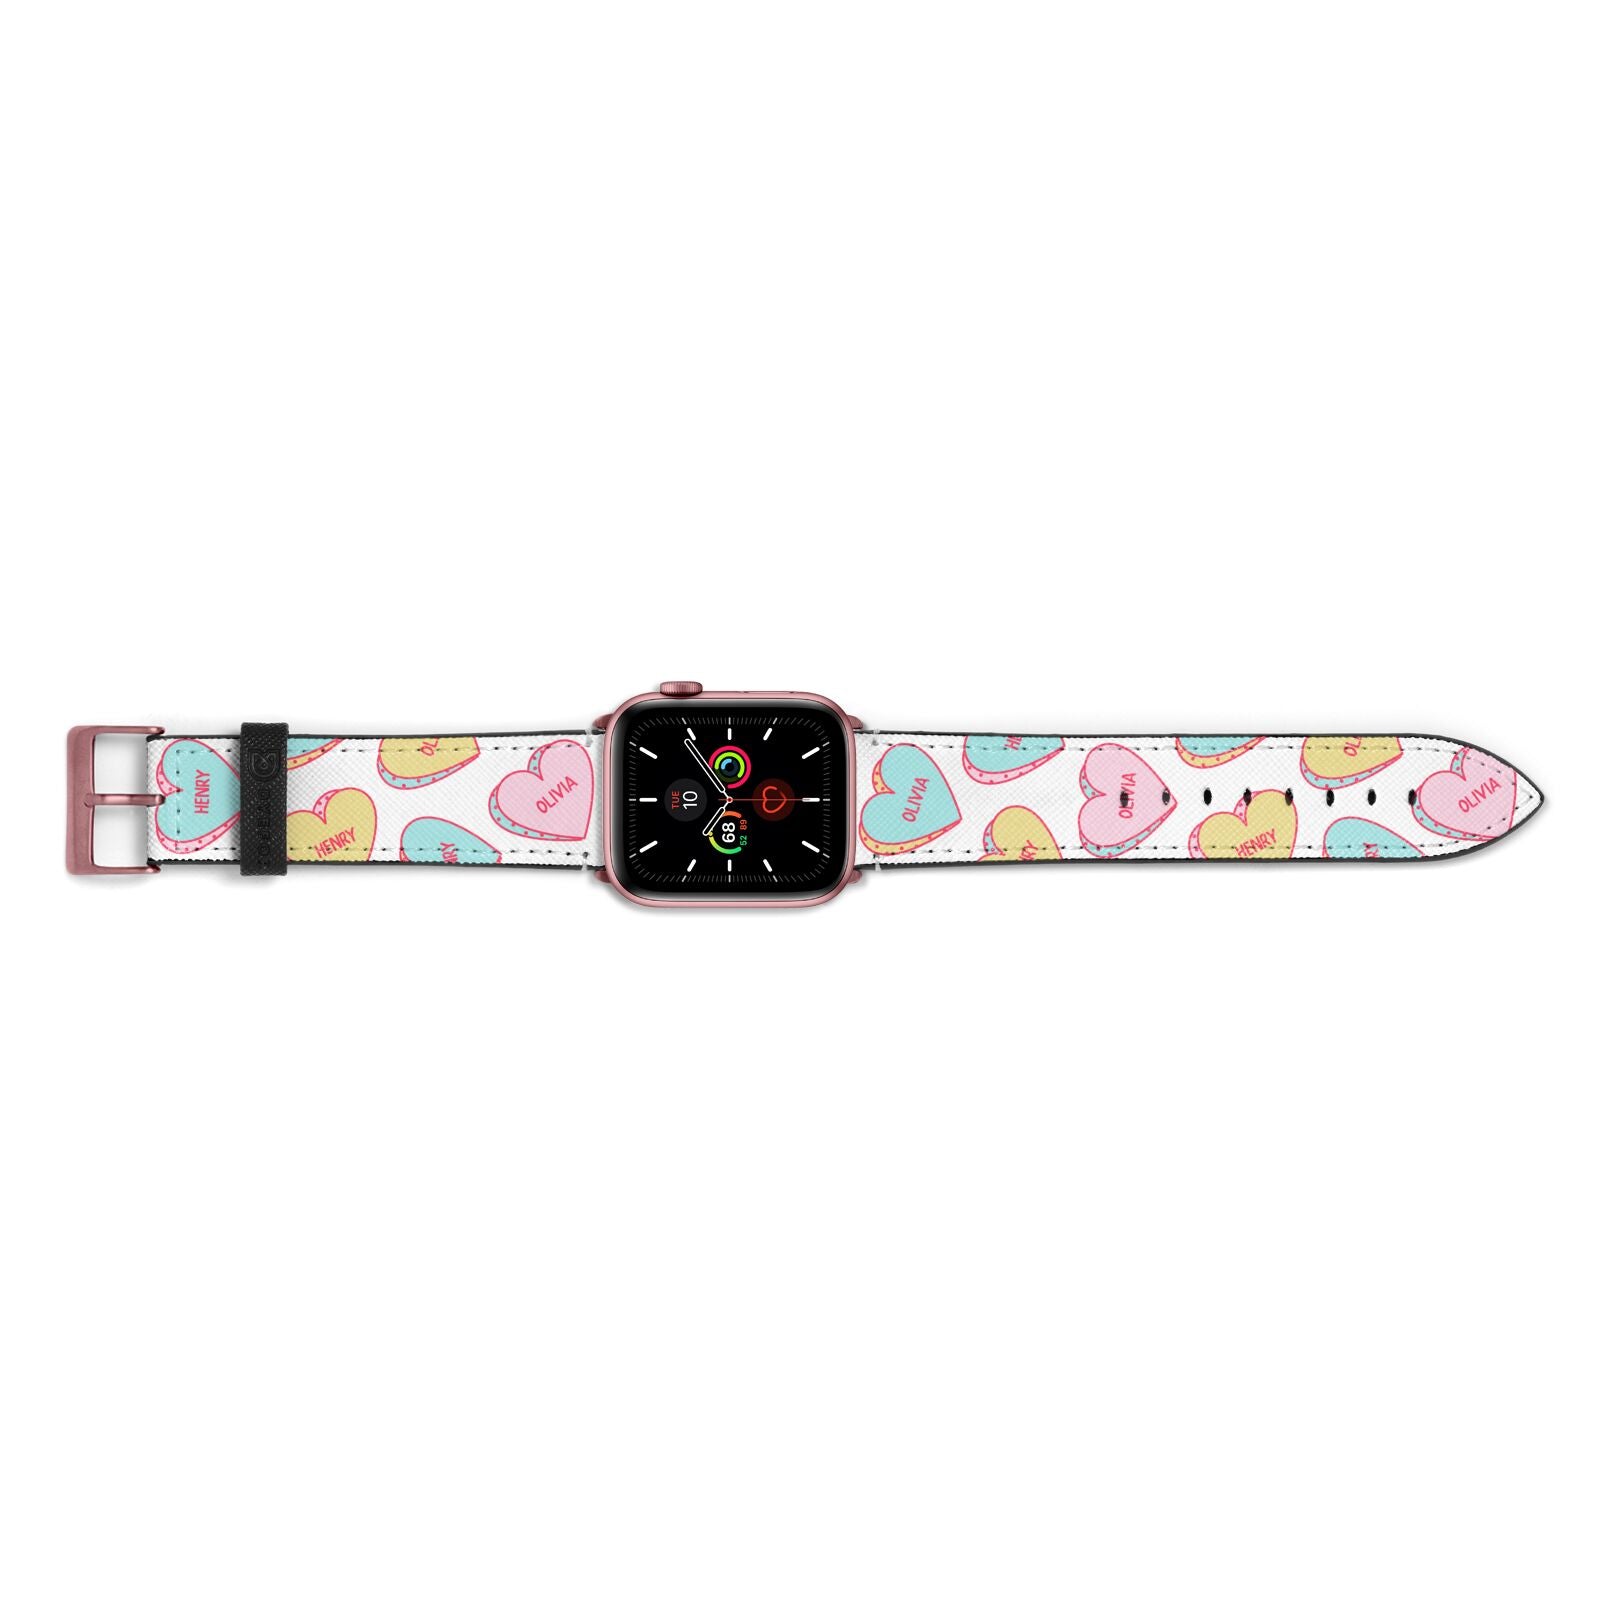 Personalised Heart Sweets Apple Watch Strap Landscape Image Rose Gold Hardware